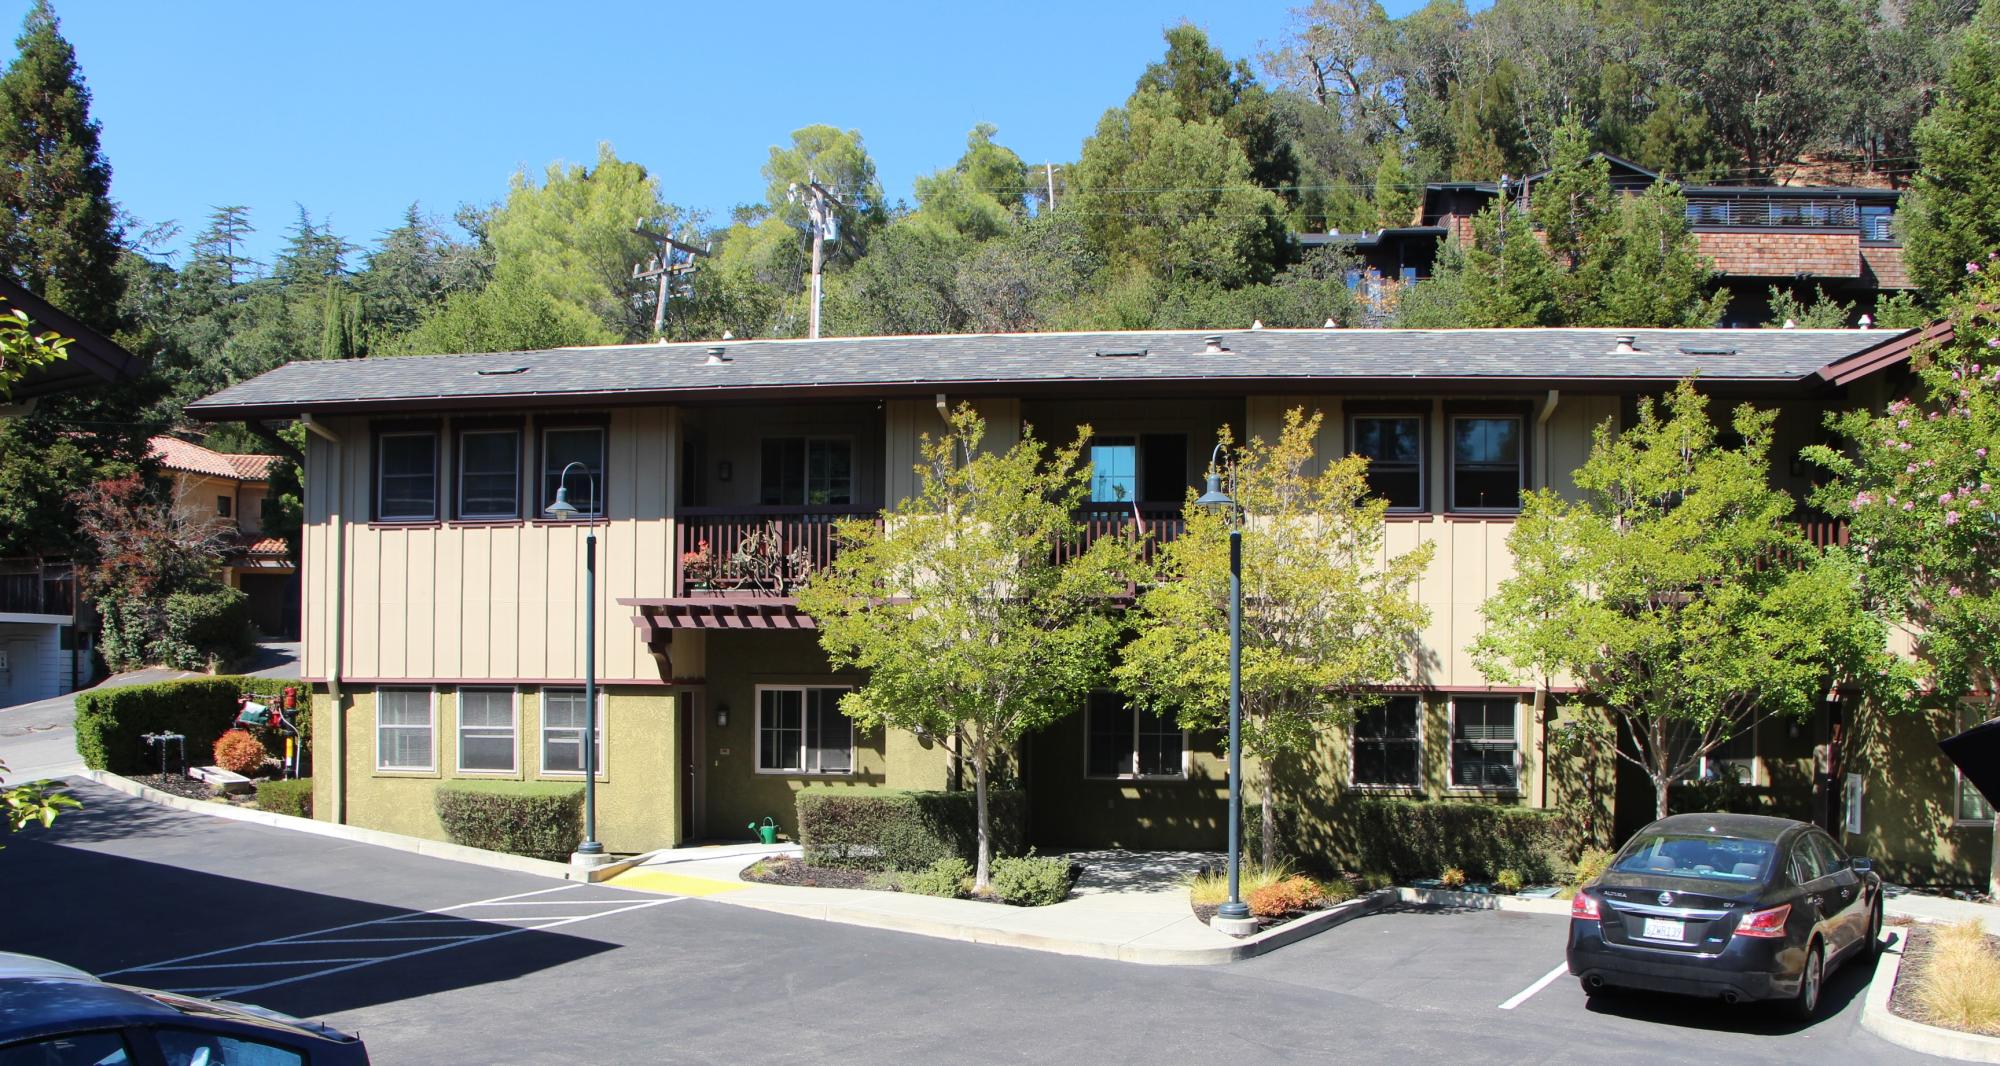 Two story multi-unit building with a driveway and parking surrounding the building.